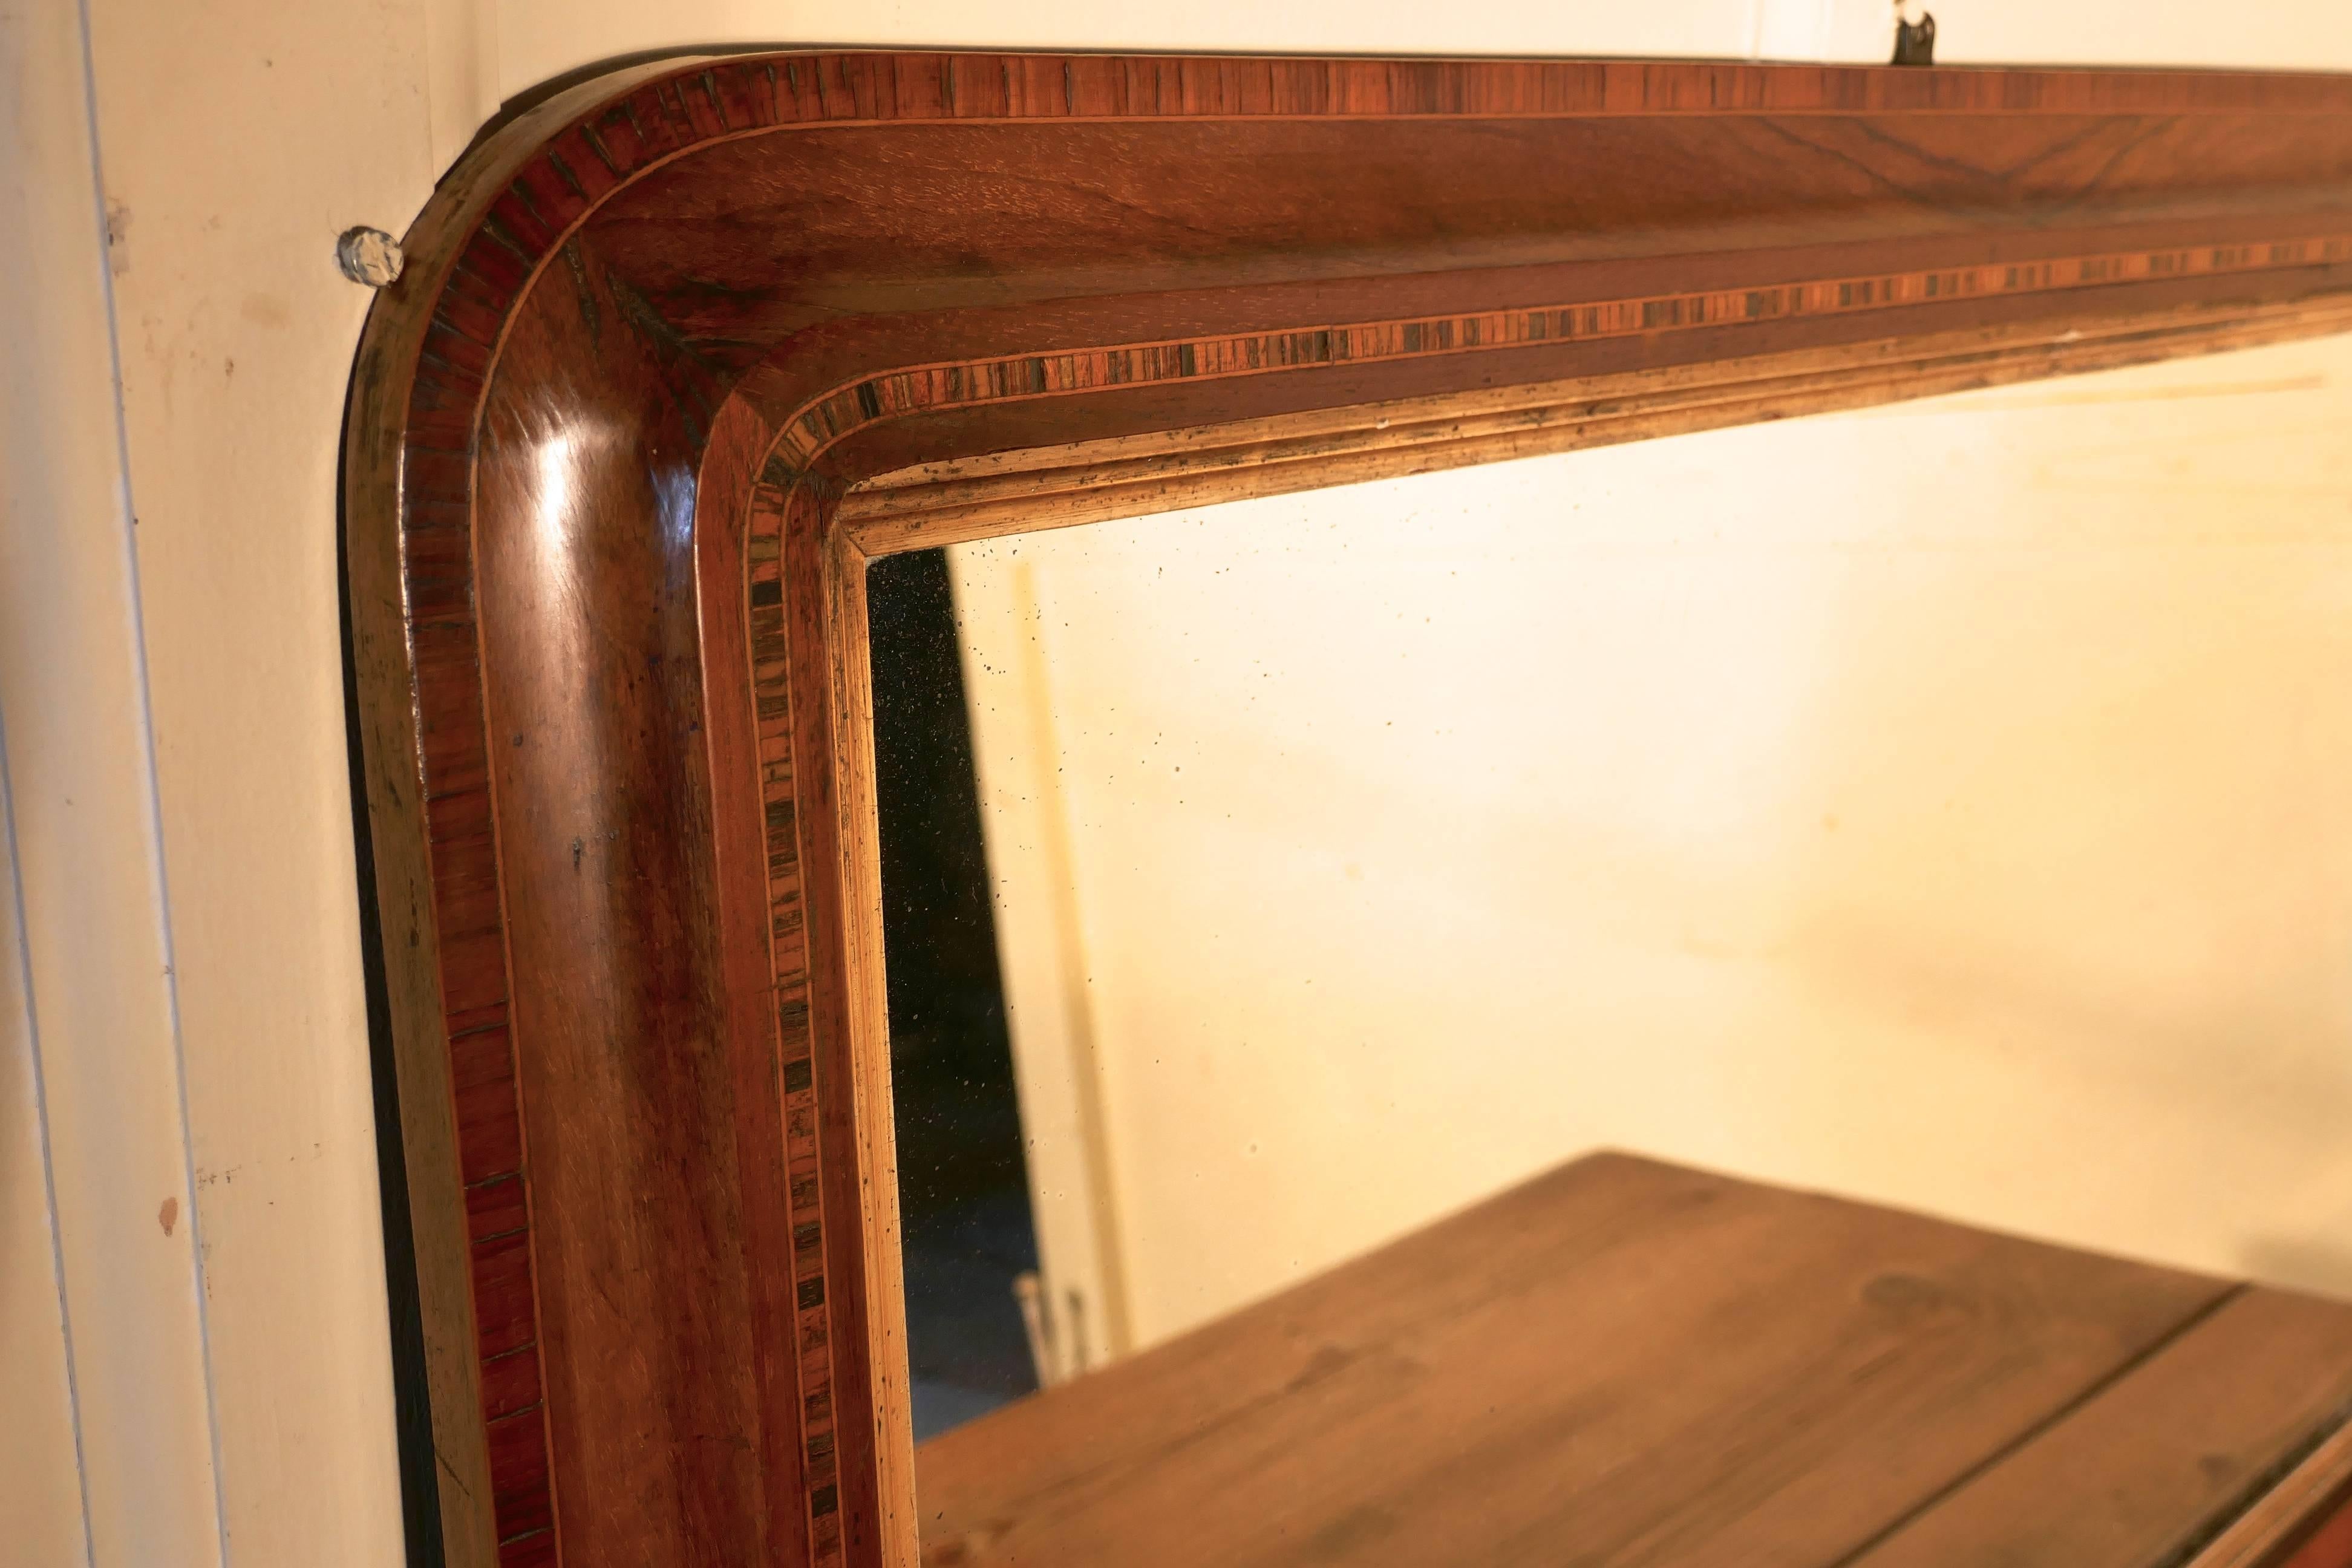 Victorian mirror inlaid walnut overmantle

The mirror frame has rounded top corners, it has a dainty inlaid border at both the outer and inner edge of the frame and it stands on small white ceramic feet
The mirror glass appears to be original and